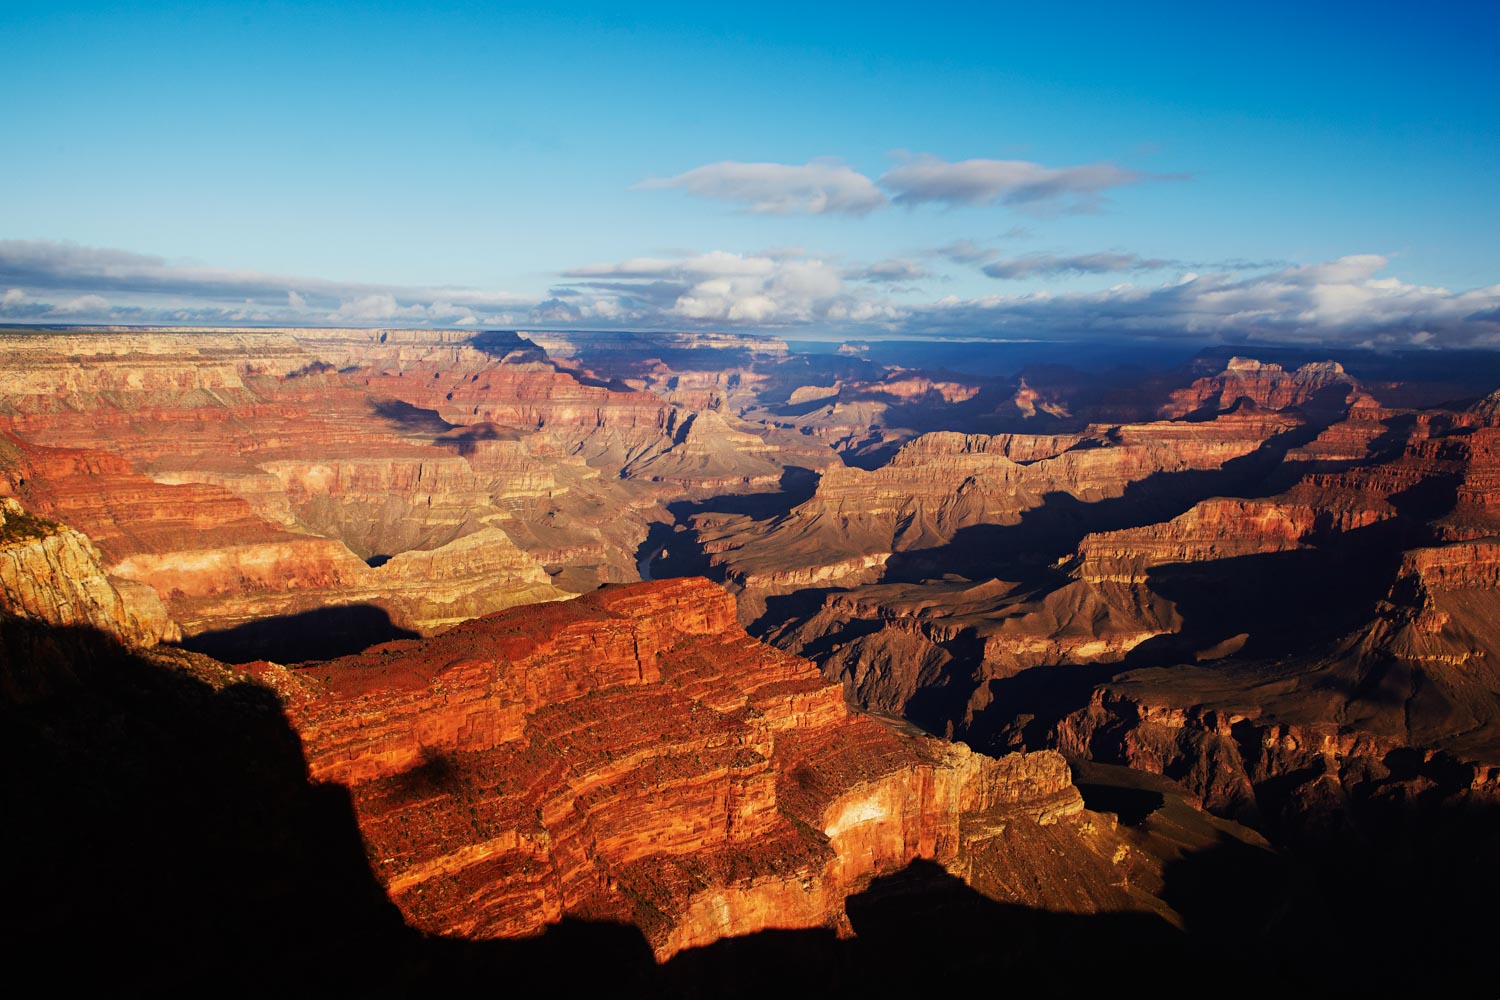 Overview of Grand Canyon seen from South Rim © Mark Read / Lonely Planet